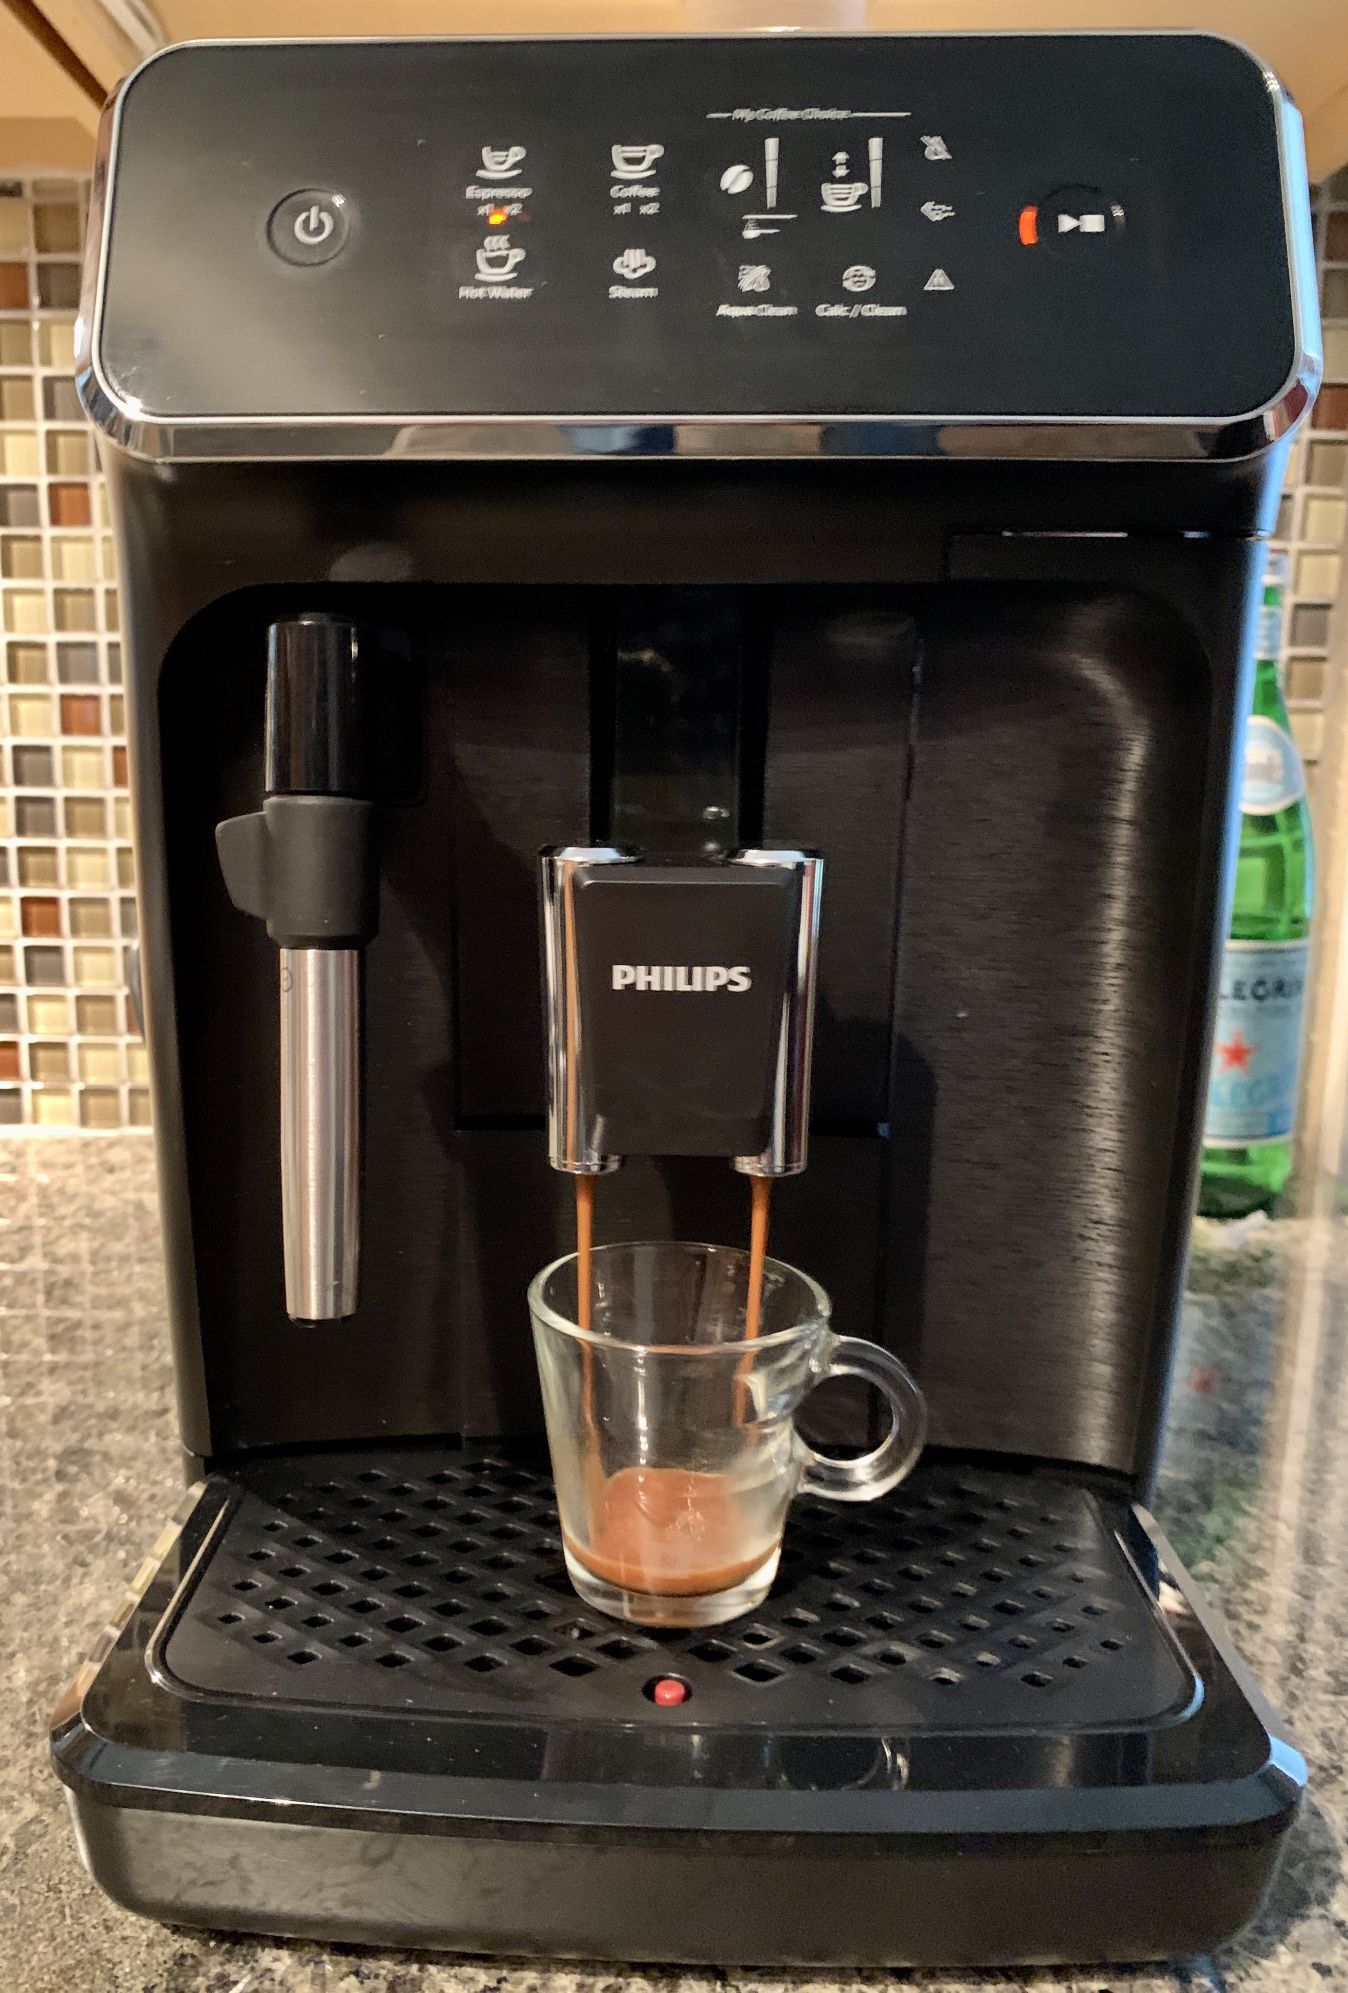 NEW In Box NINJA Pods & Grounds Coffee maker And Milk Frother for Sale in  Las Vegas, NV - OfferUp